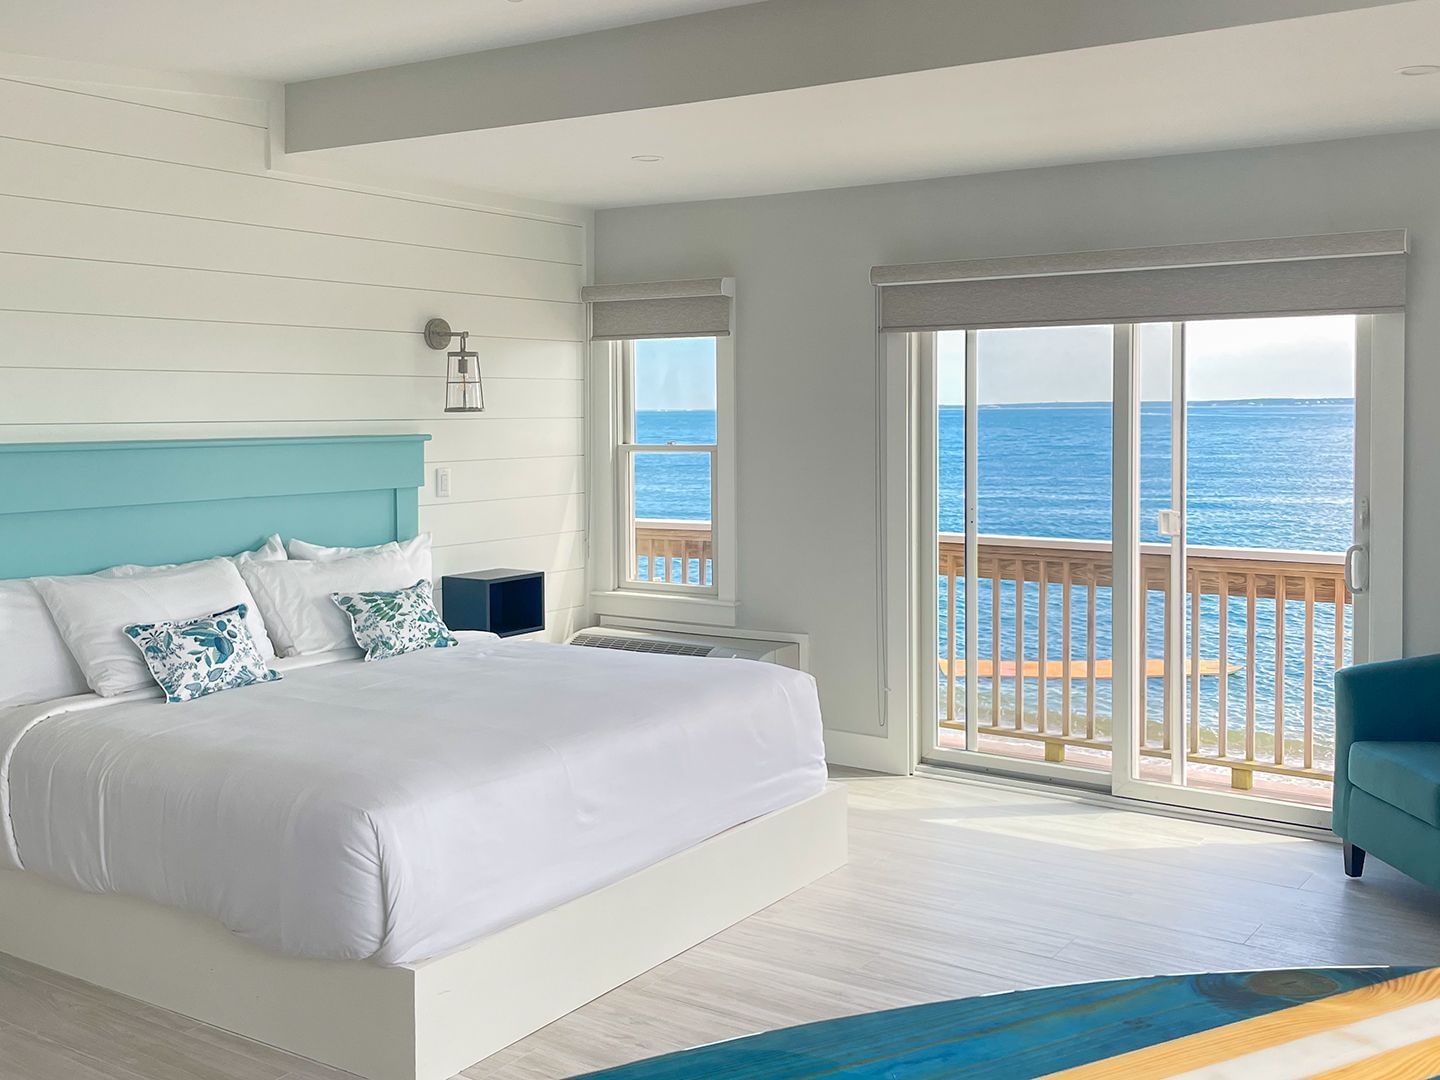 Interior of the Corner Suite Ocean View at Falmouth Tides